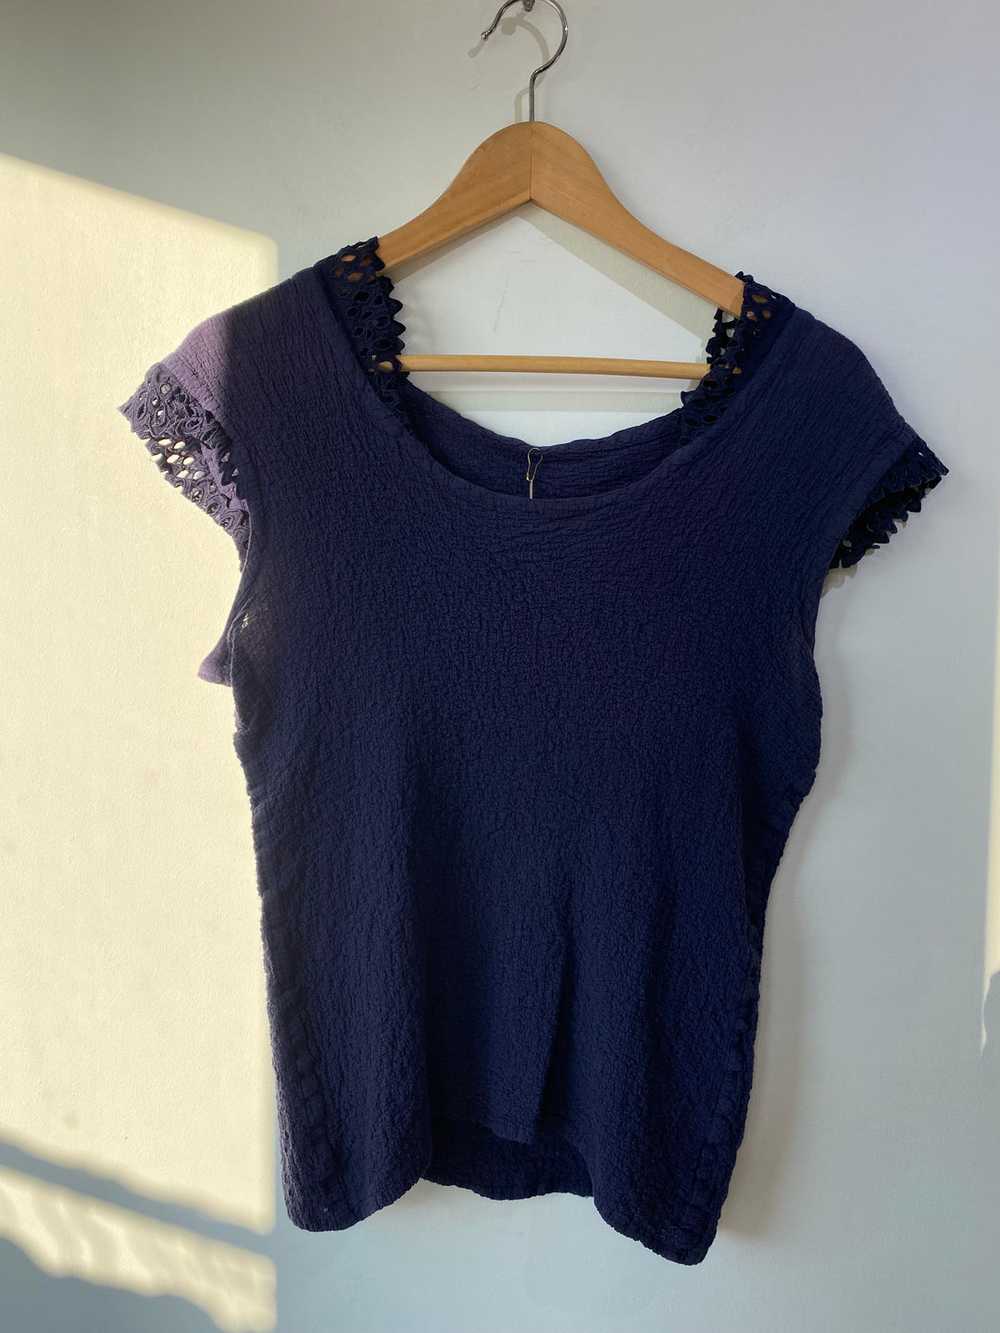 Vintage Issey Miyake Me Navy Blue Top with Lace C… - image 5